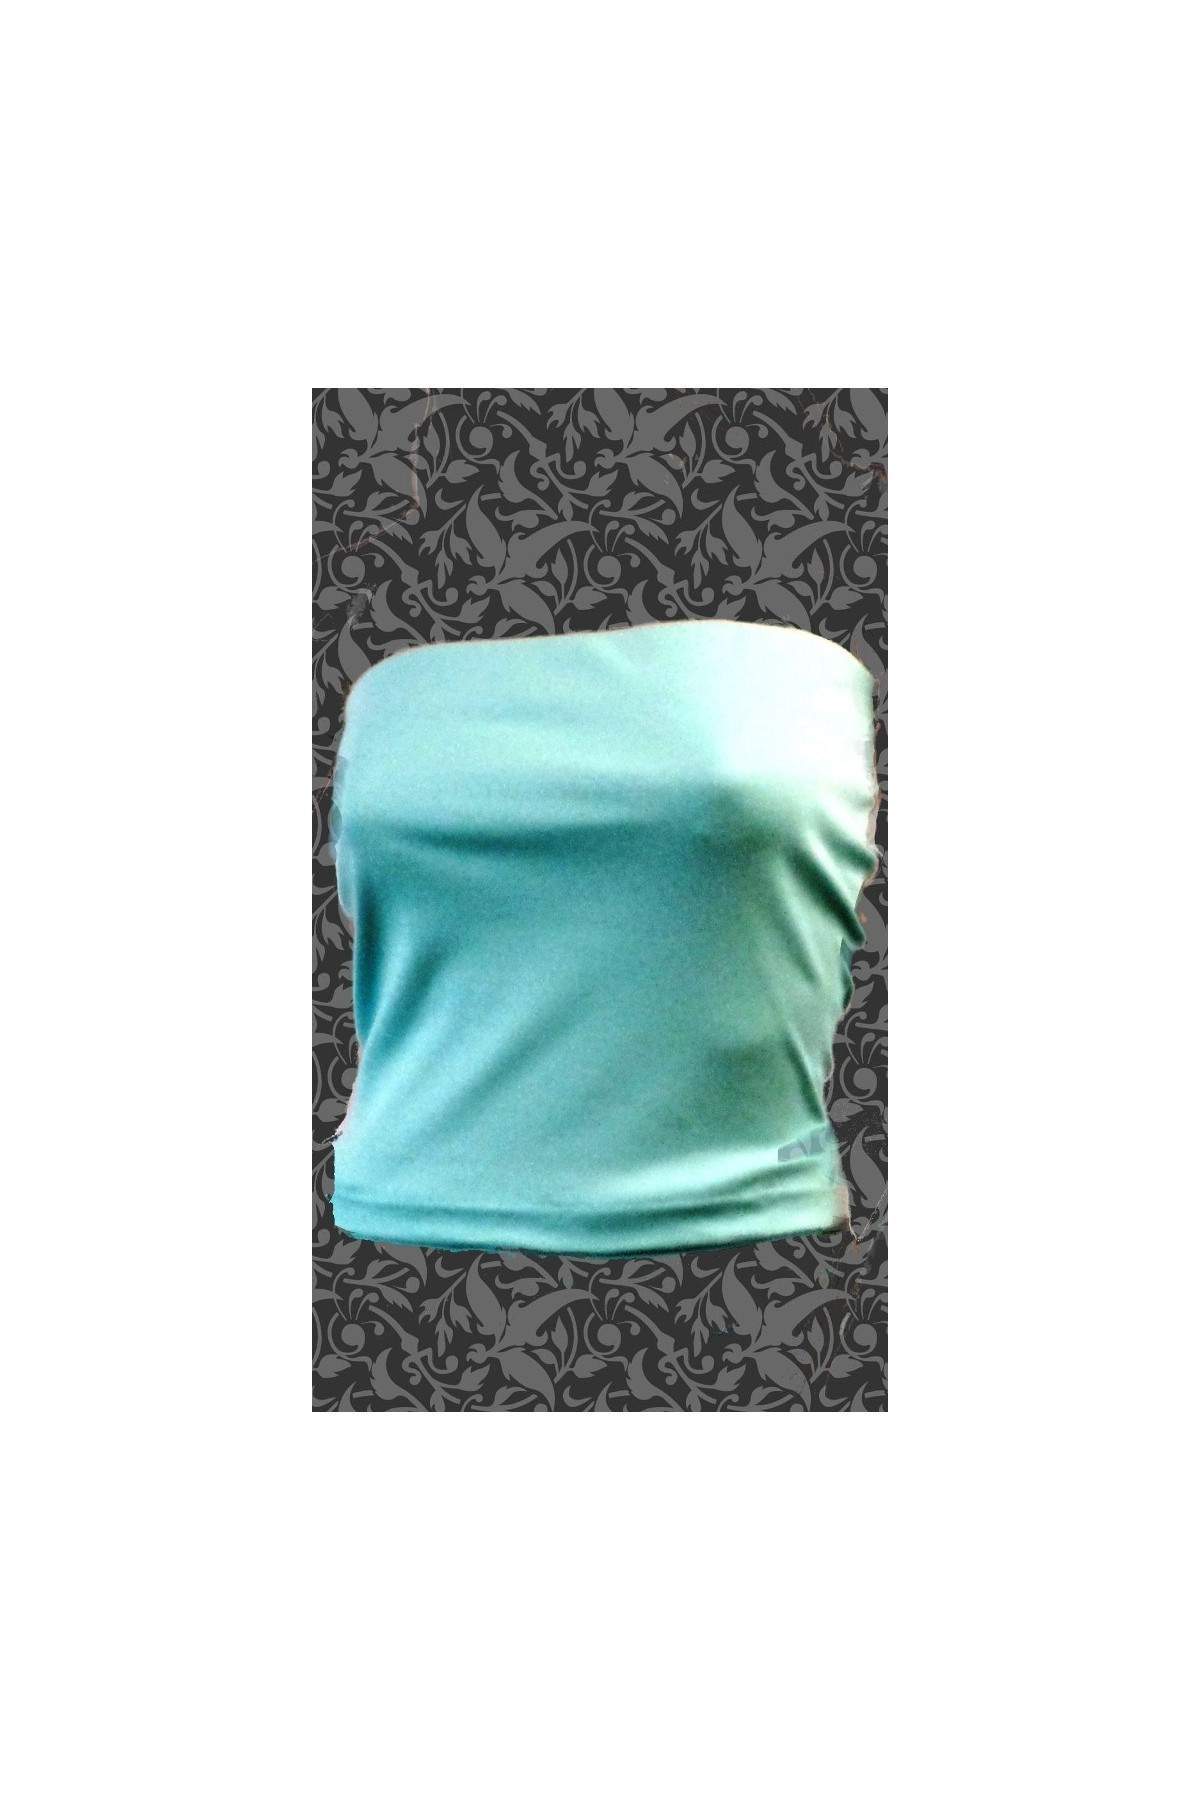 black week Save 15% Bandeau-Top Turquoise Stretch - 